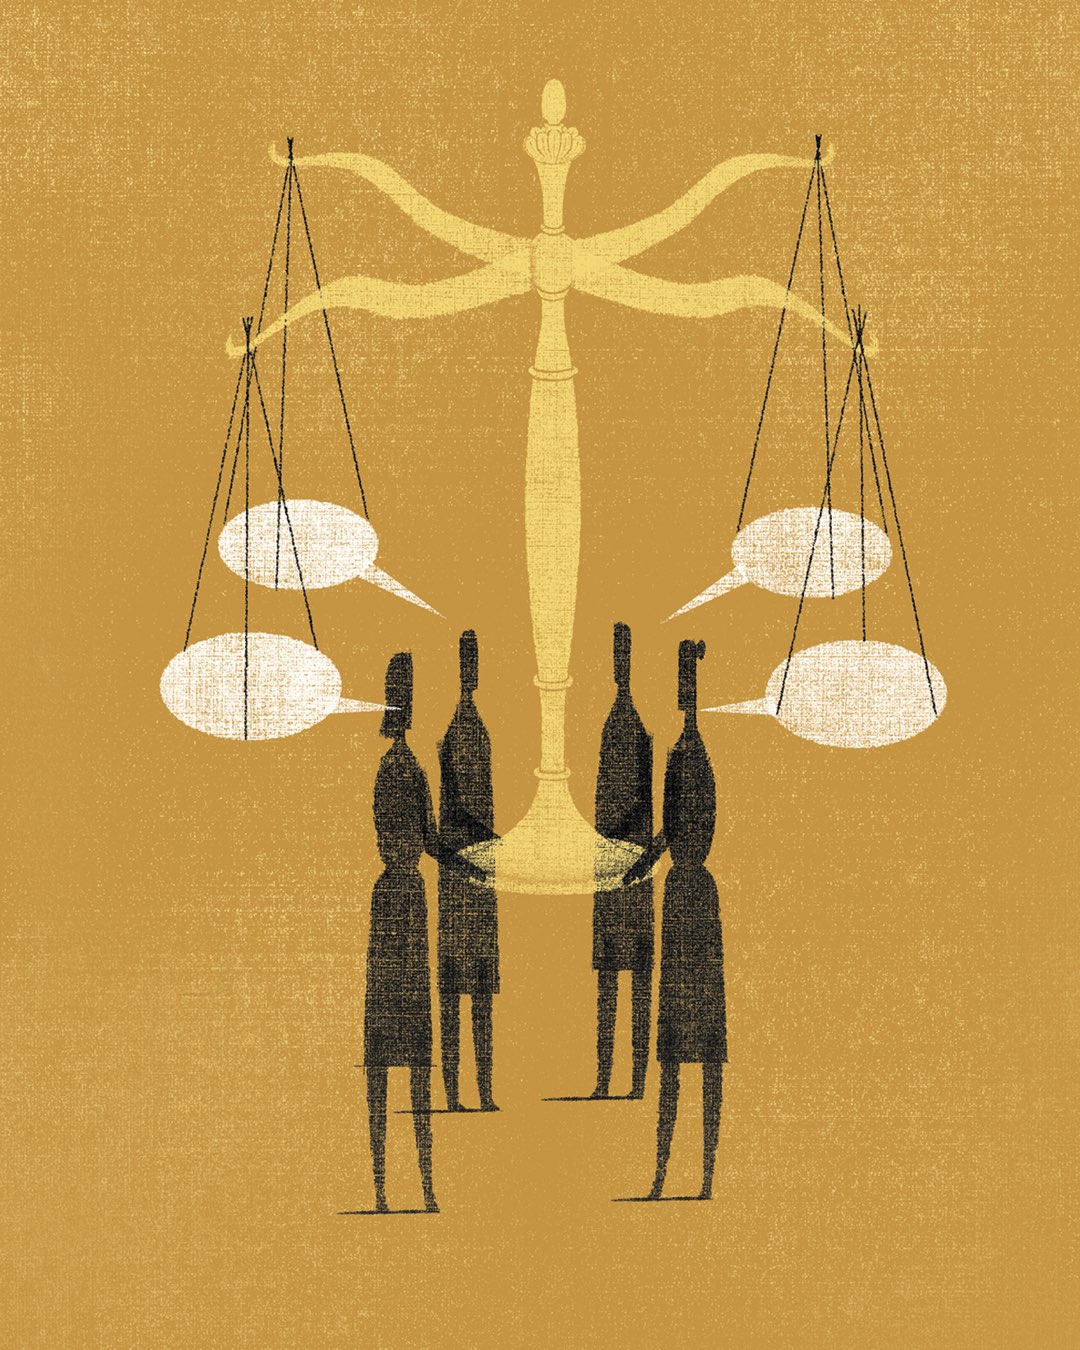 Graphic artwork on a mustard-colored background showing four dark silhouettes holding and balancing the scales of justice